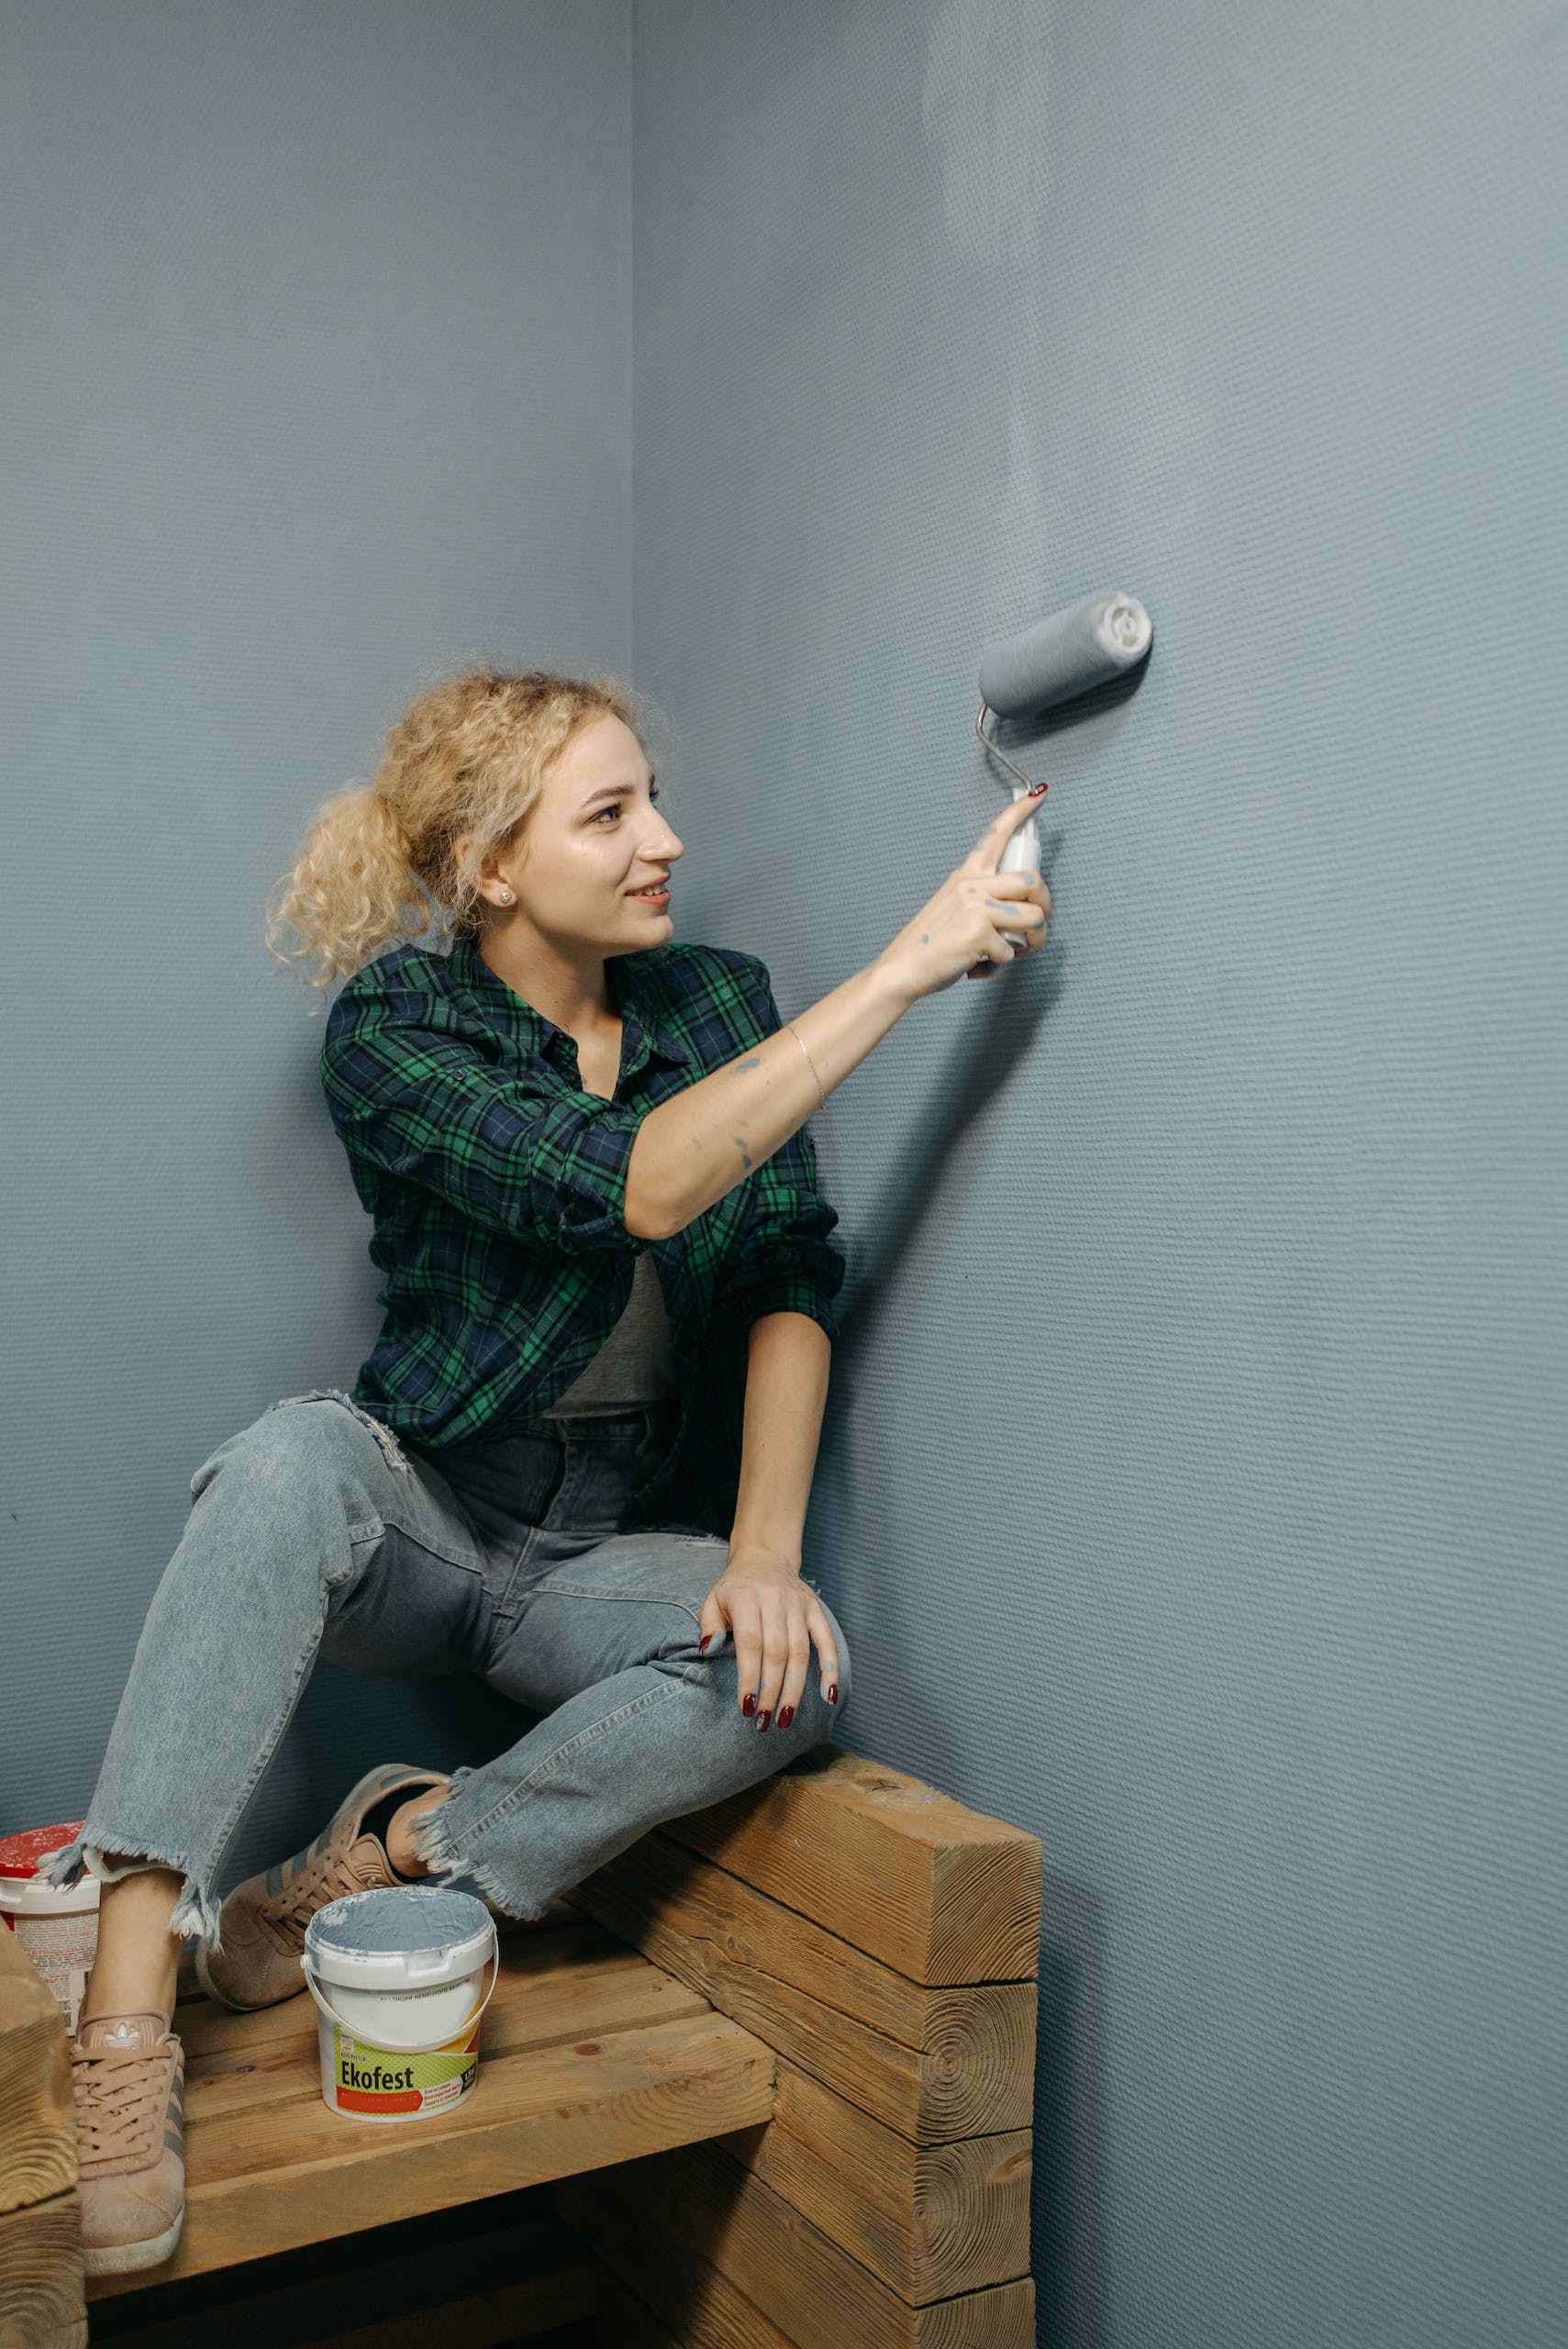 Woman Painting a Room With a Roller Paint Brush